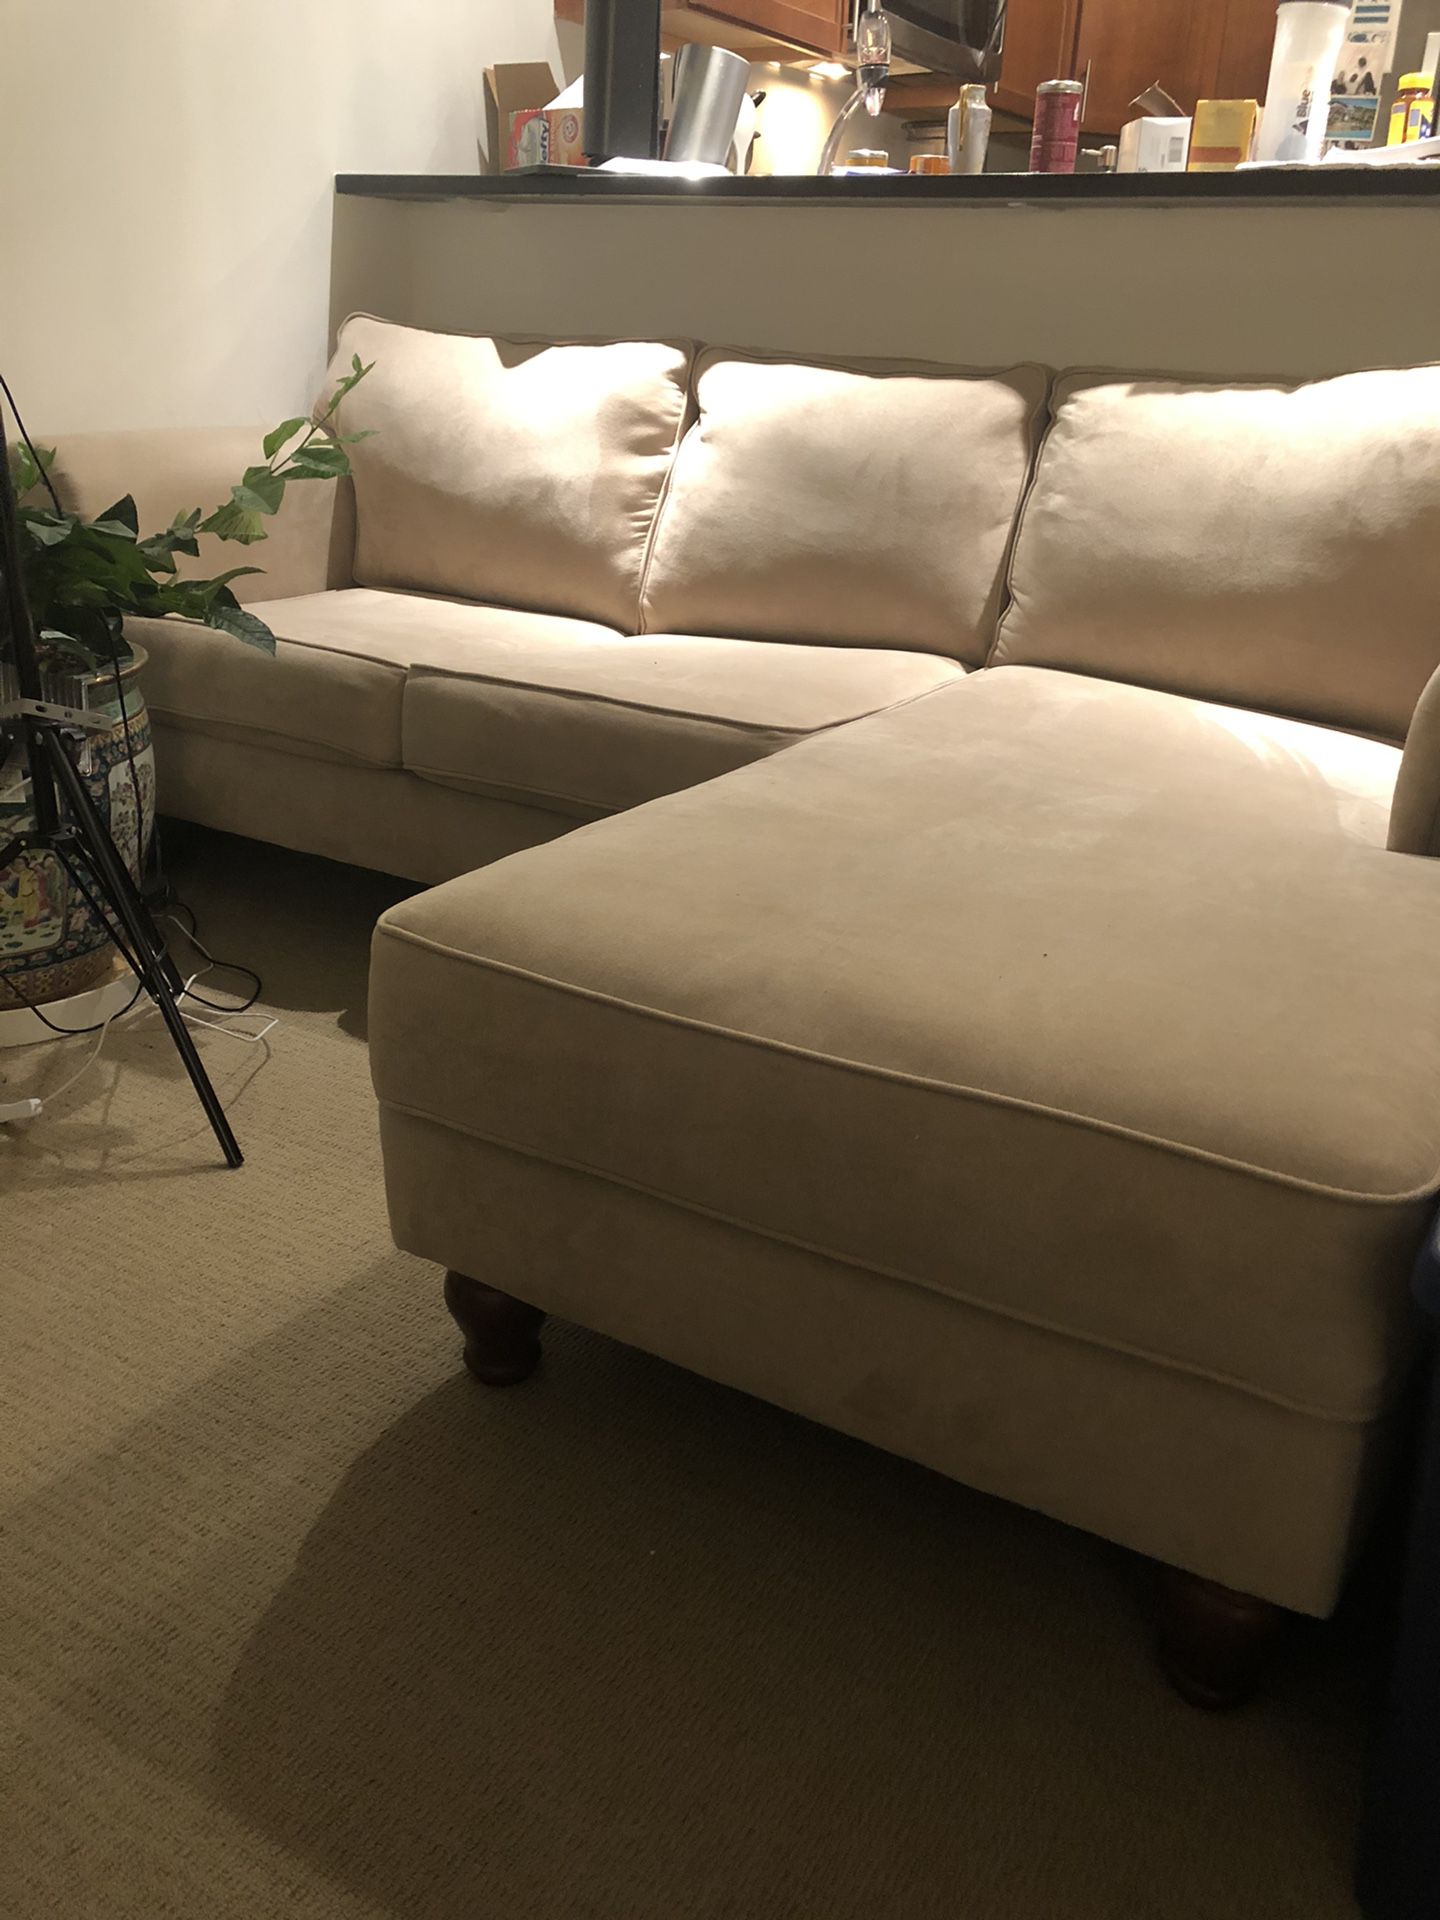 Pier one sectional with ottoman